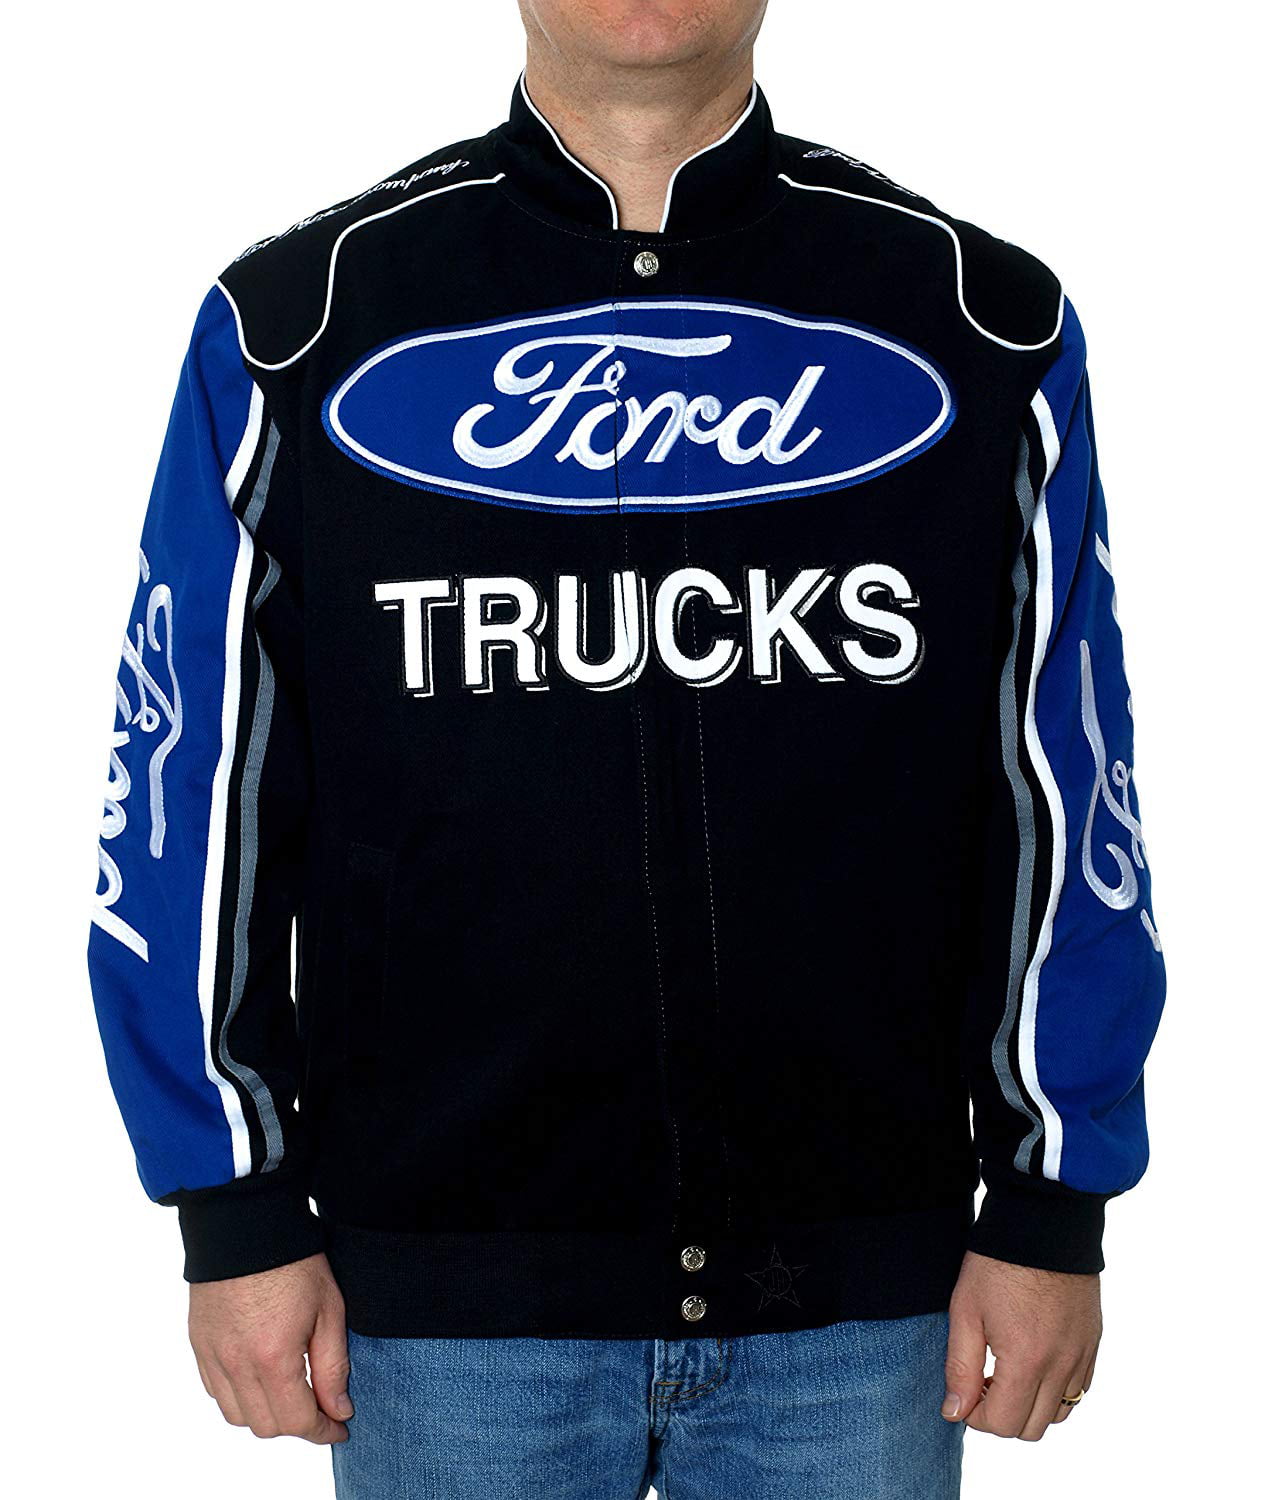 Ford Truck Parking Only Sweatshirt Pickup Truck Built Ford Tough Sweater